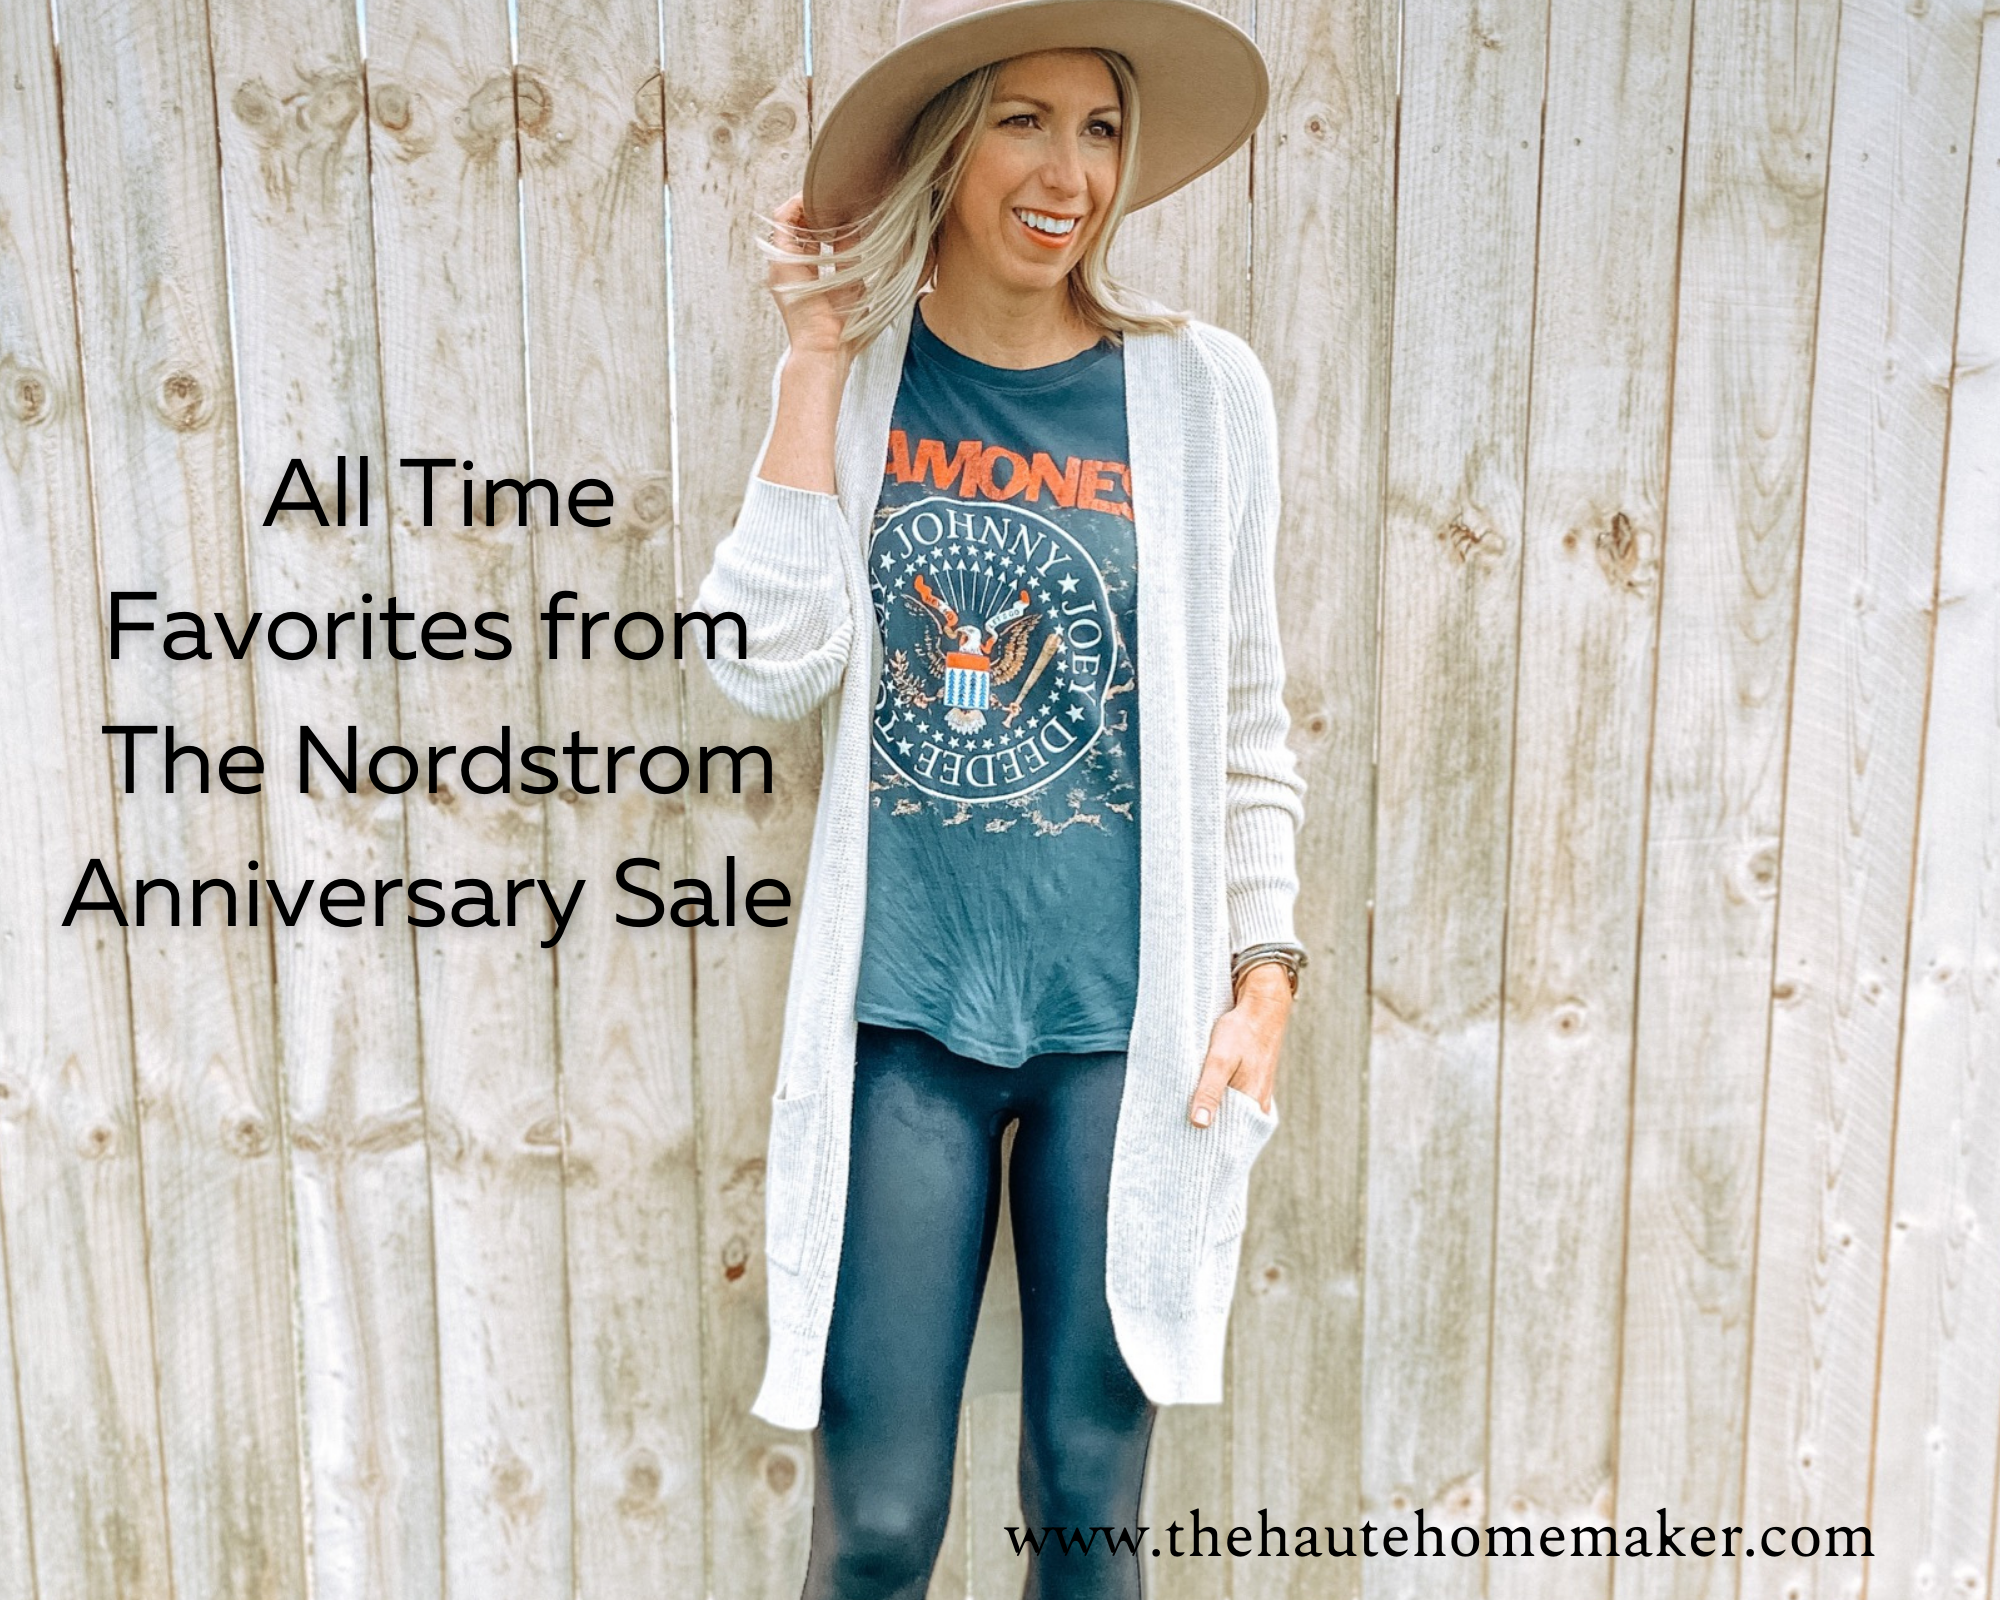 The Best Nordstrom Anniversary Sale Deals for the Whole Family